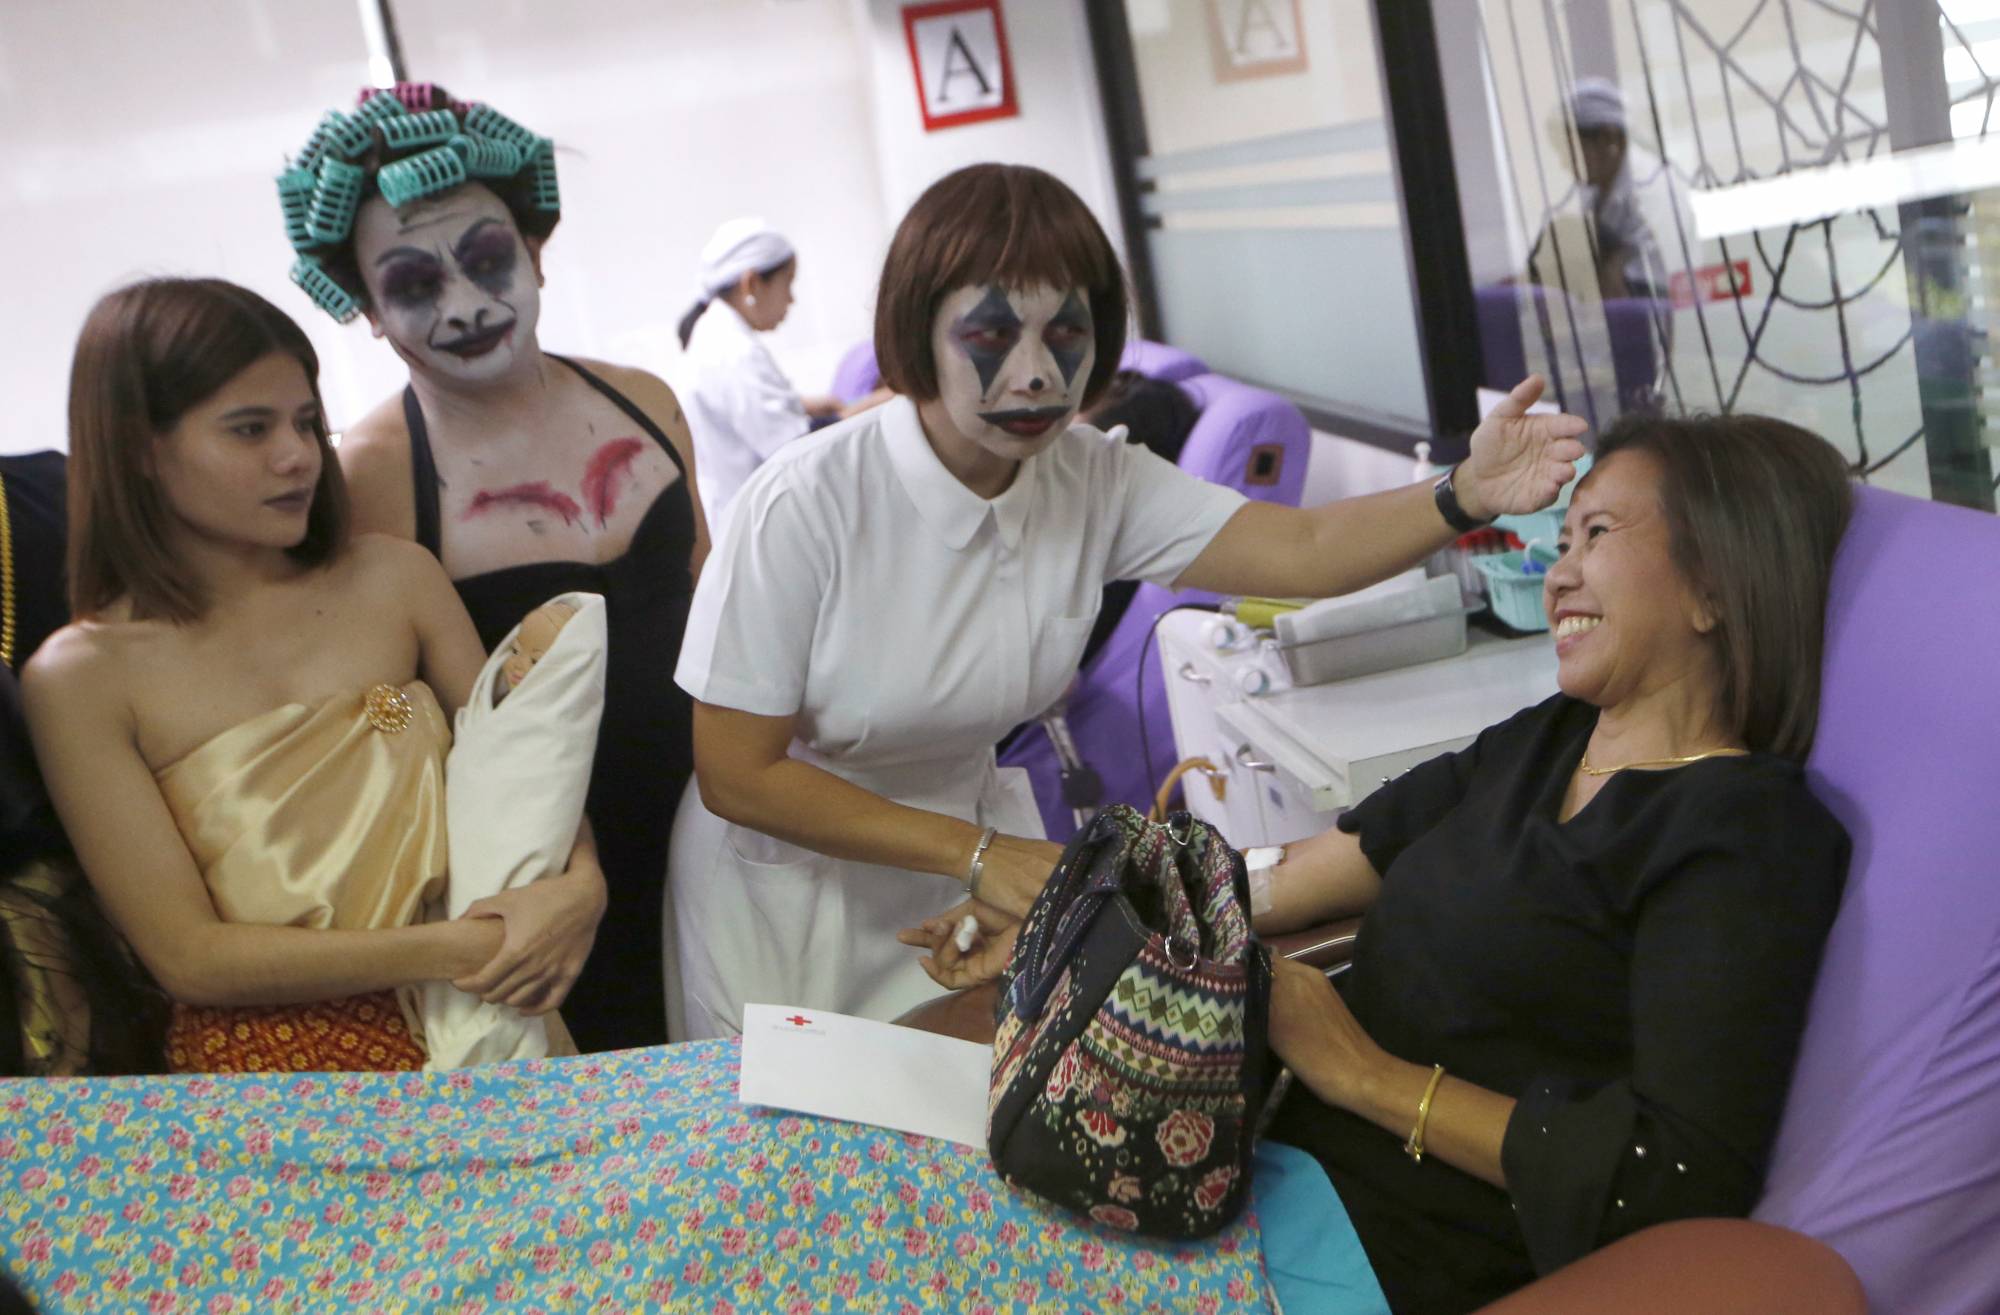 Thanat Chotrat, second from left, and Manful Bumroongton, third from left, dressed in a ghost costume for Halloween talk to volunteer donate blood on bed at the Thai Red Cross in Bangkok, Thailand, Thailand, Wednesday, Oct. 31, 2018. (AP Photo/Sakchai Lalit)